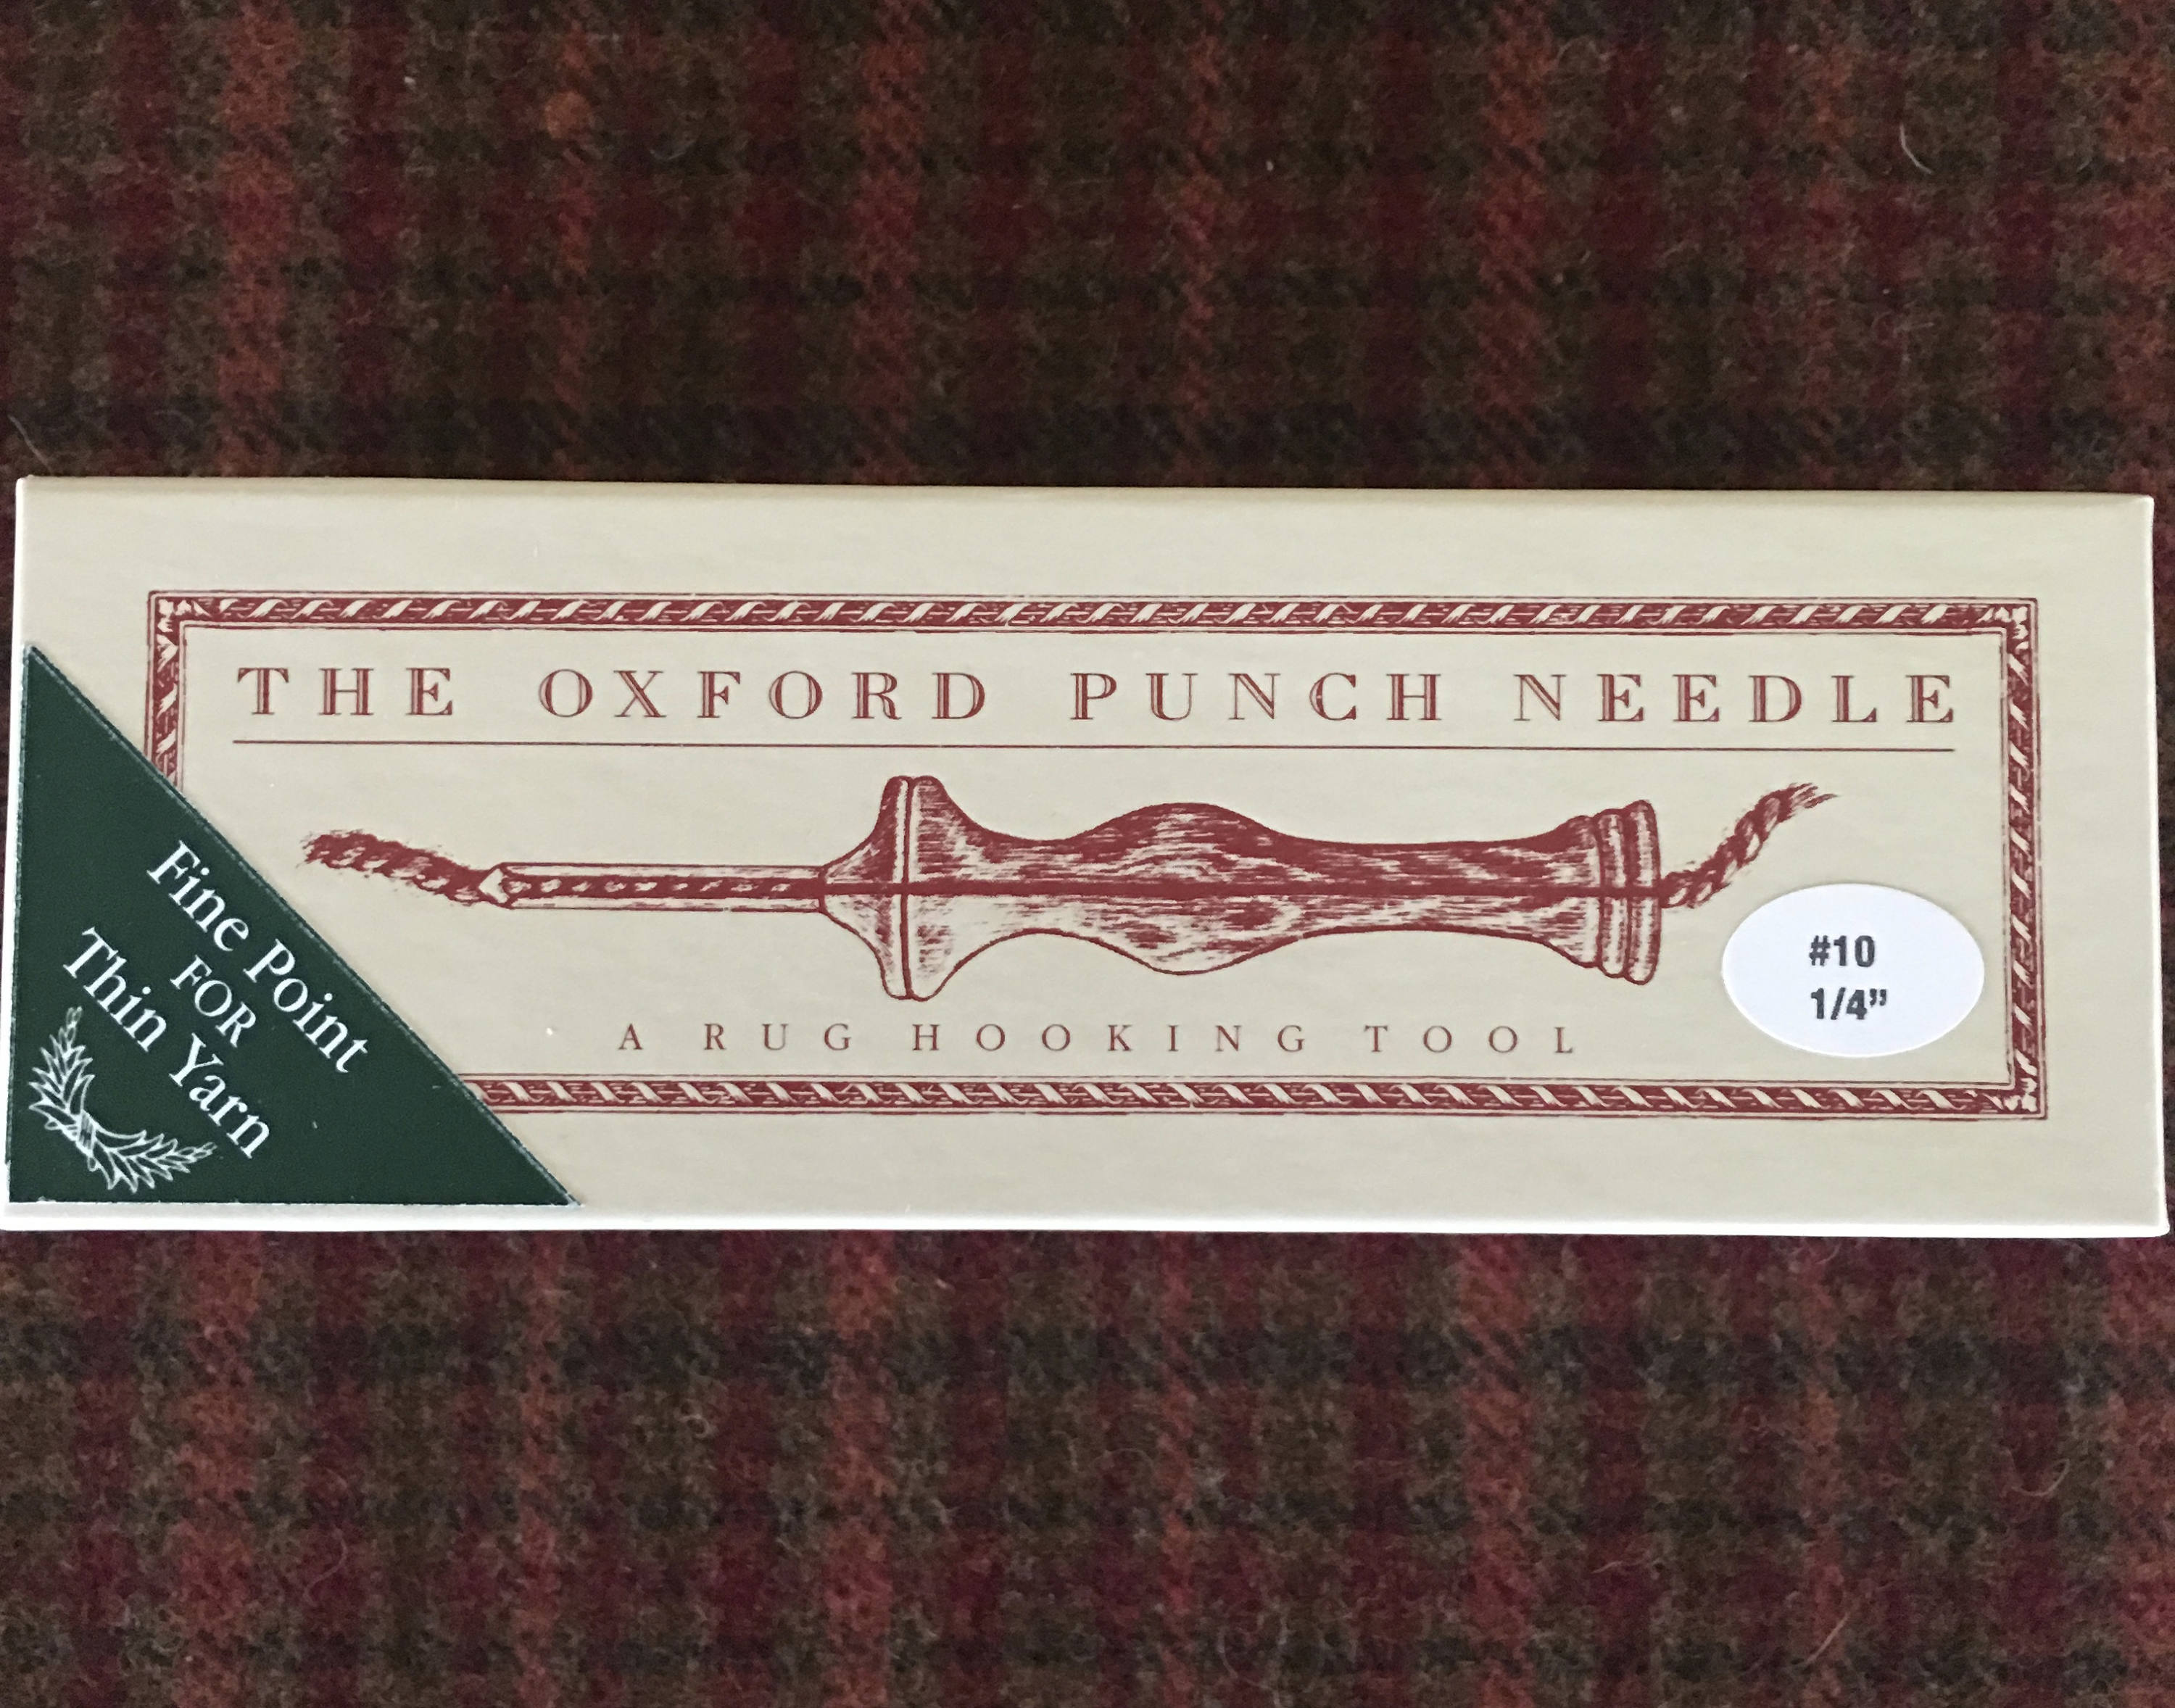 Oxford Punch Needle 14 Fine / Boxed or Unboxed / Punch Needle Tool